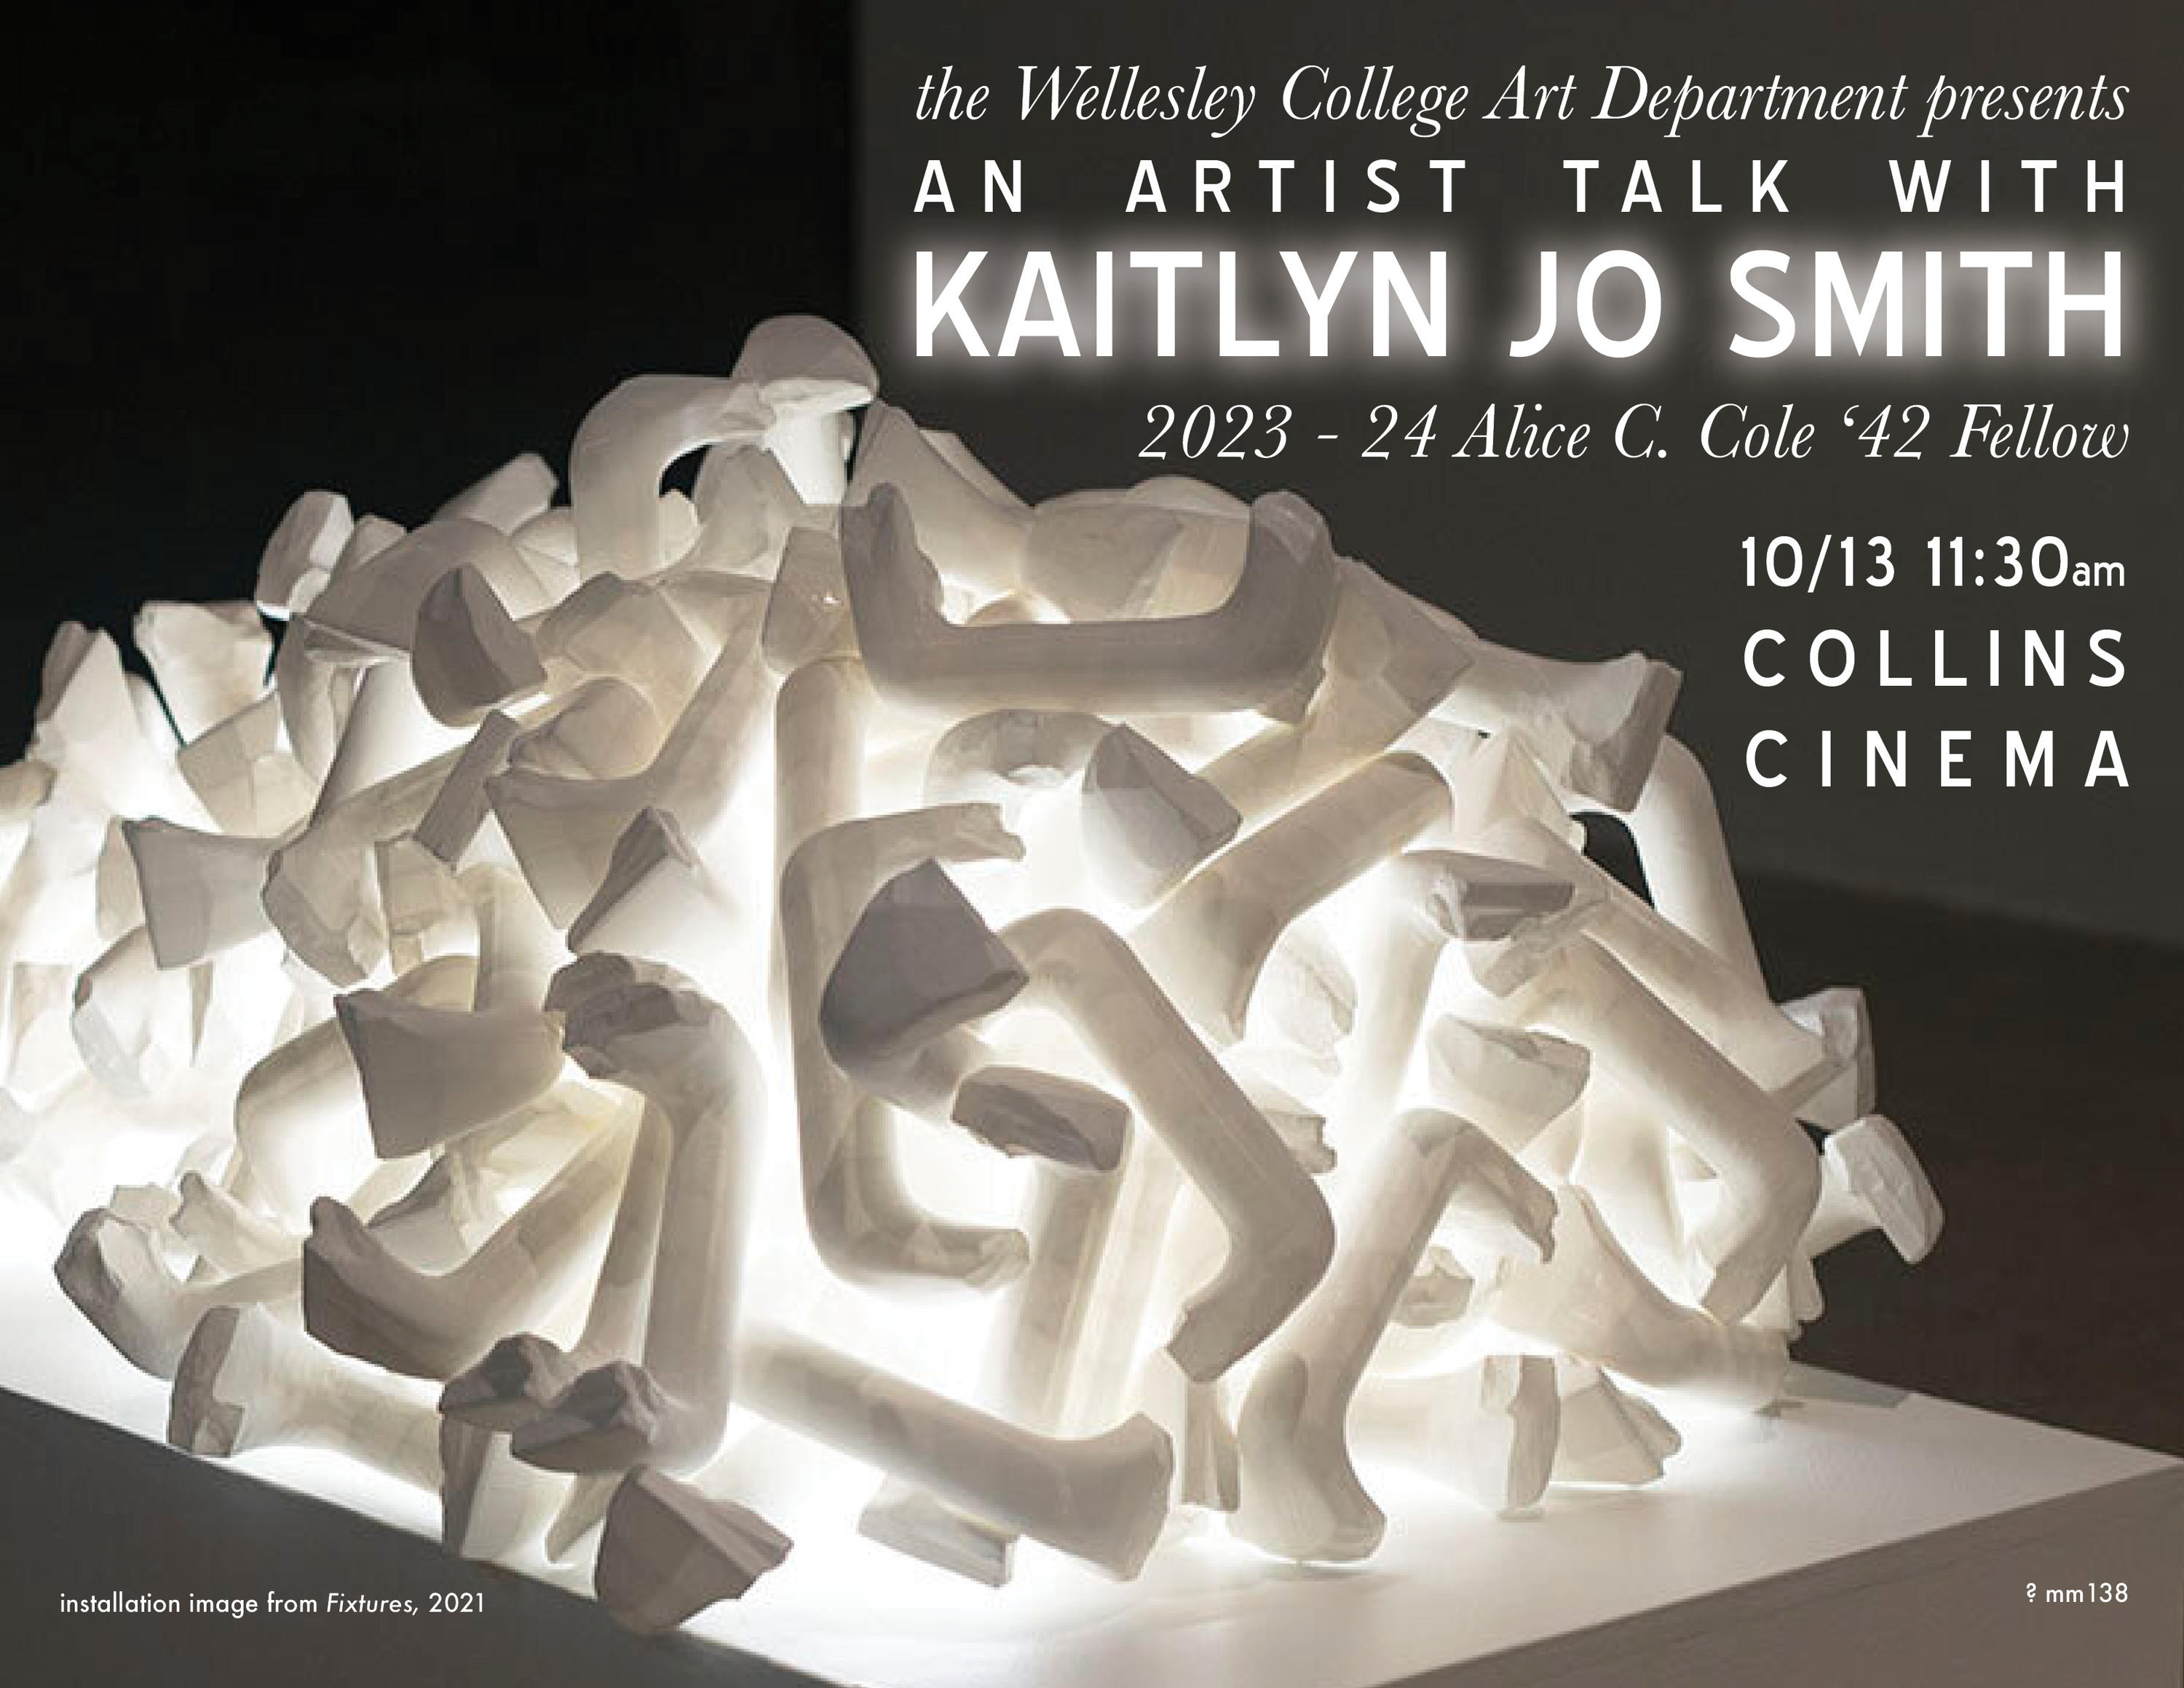 Kaitlyn Jo Smith artist talk poster feat. pile of white bracket-like shapes lit from within on black background